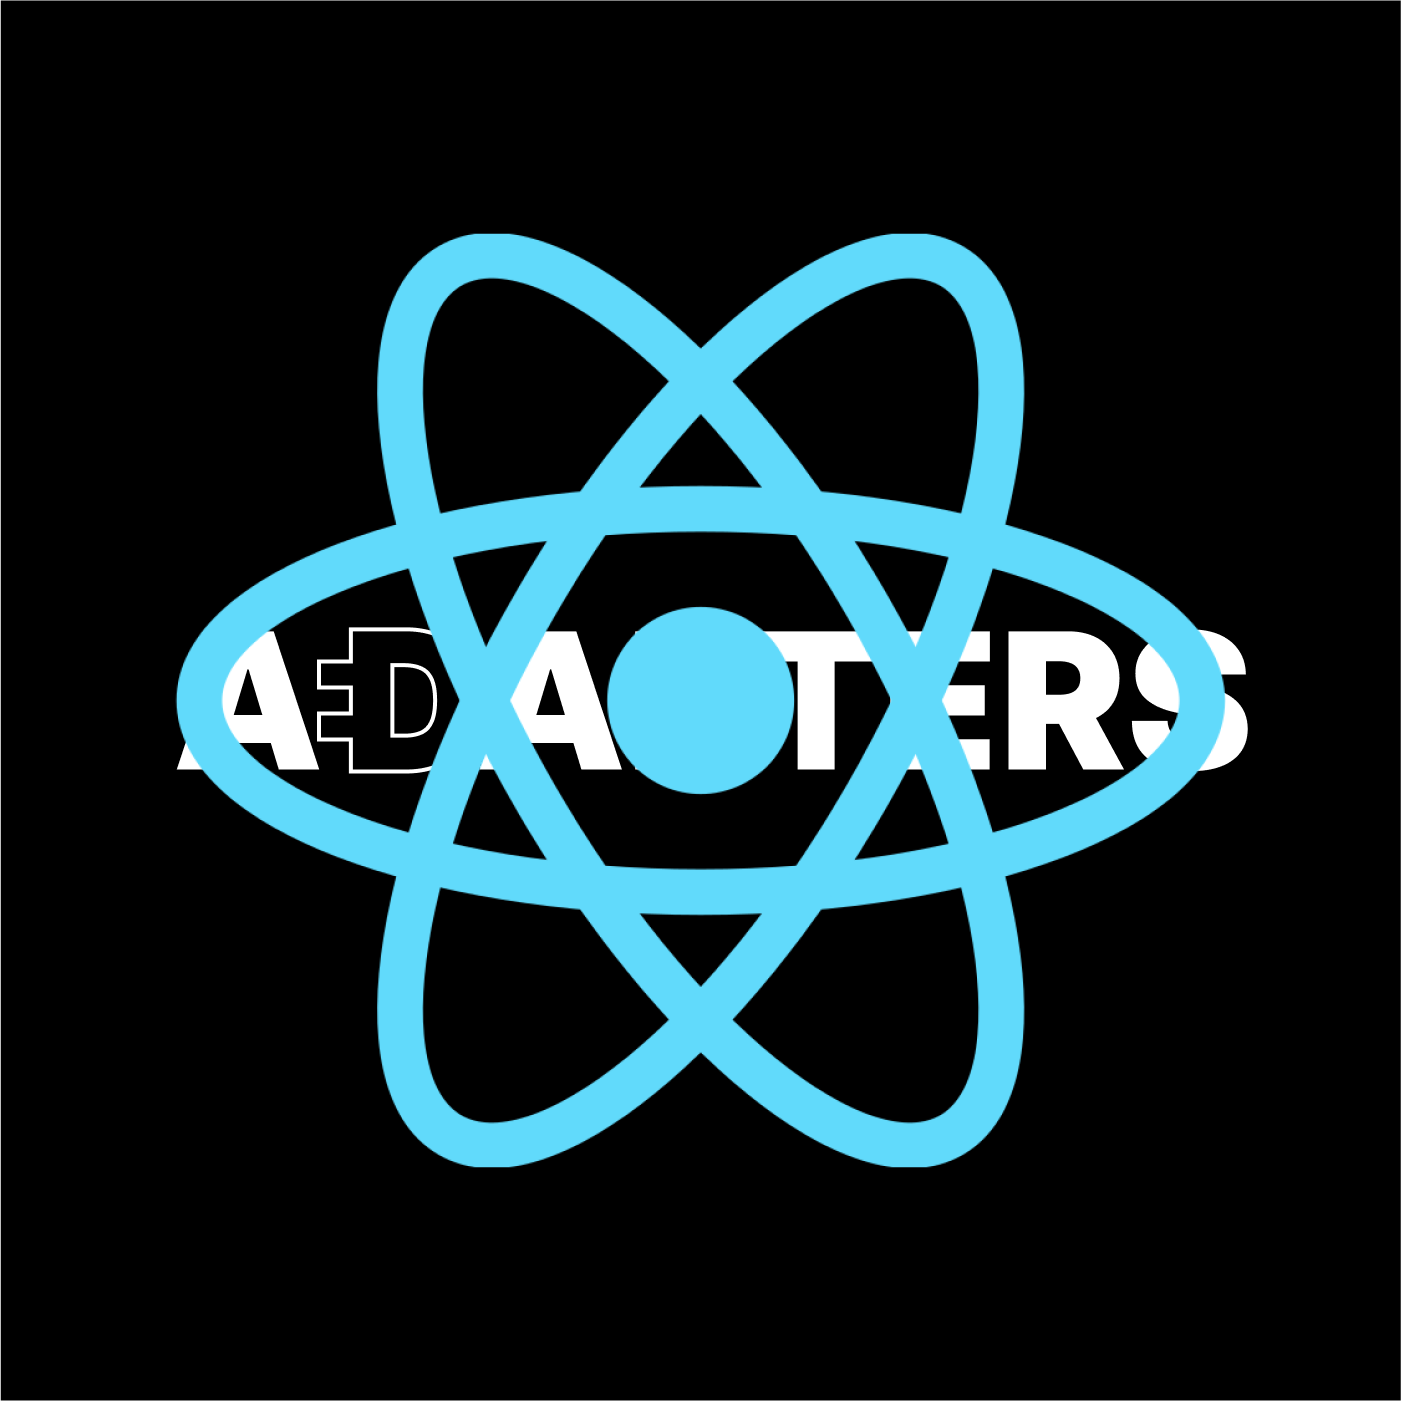 Reactjs code snippets by adapters